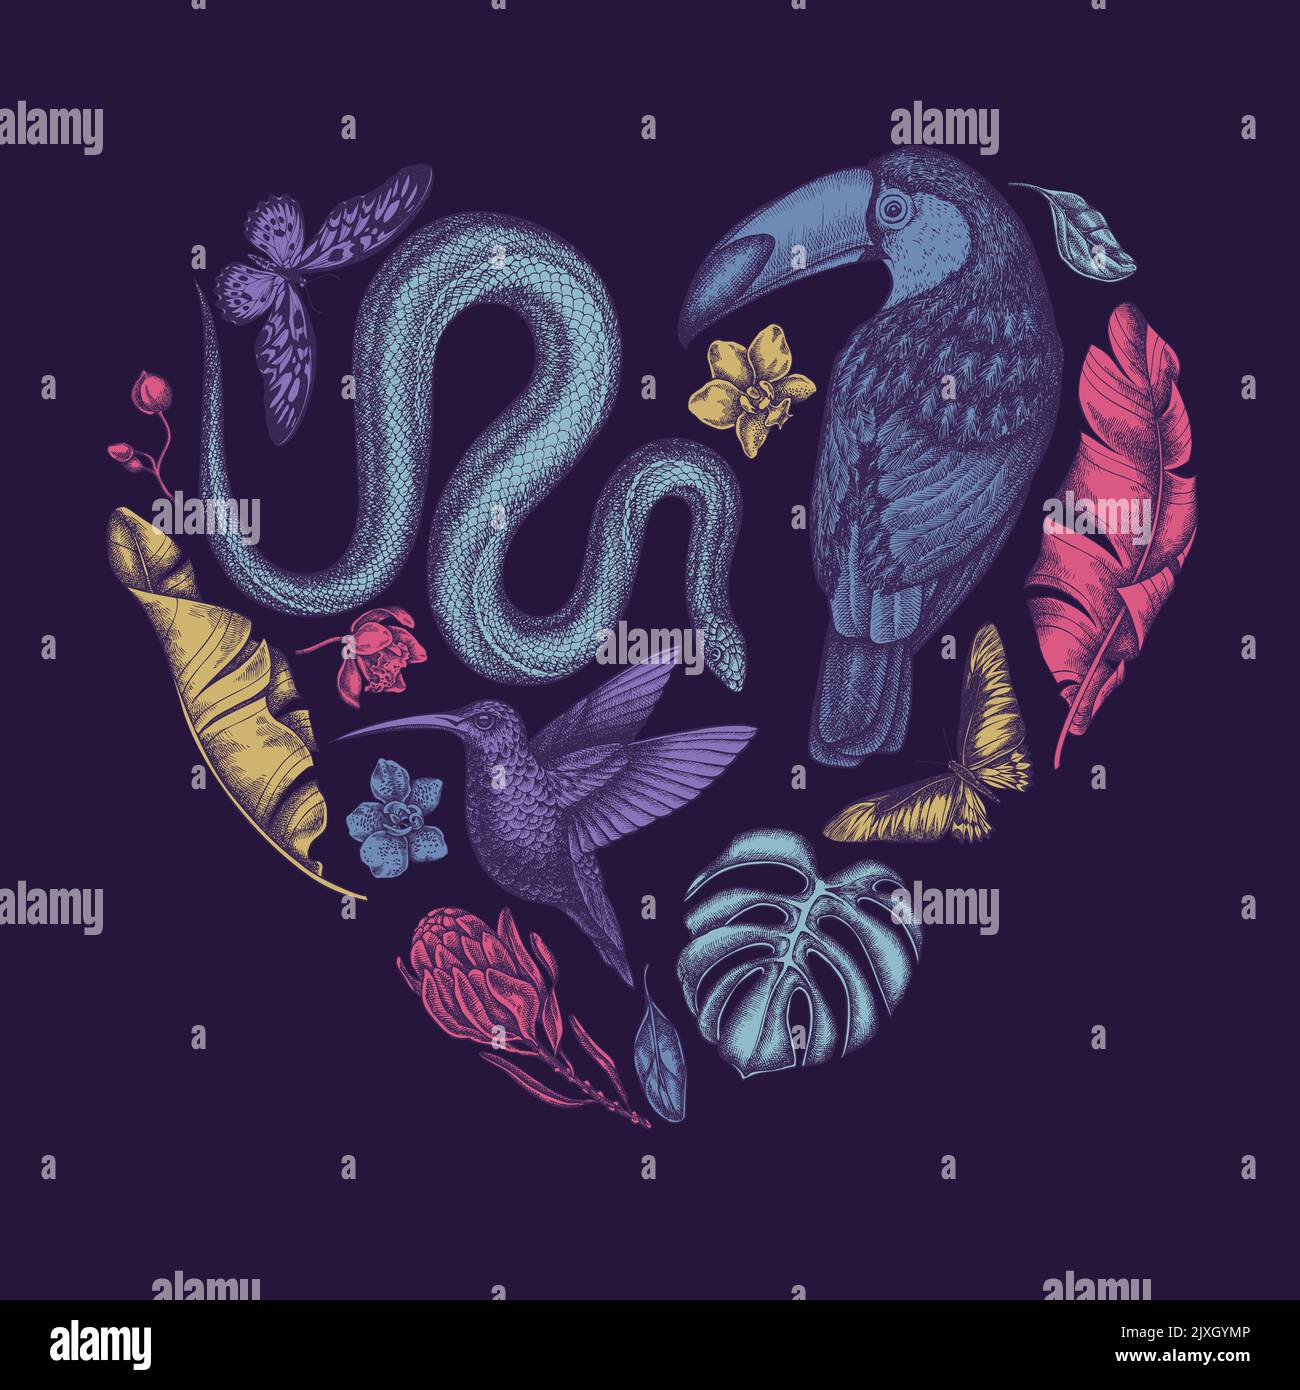 Tropical animals heart vintage design. Hand drawn snake, hummingbird, toucan, african giant swallowtail, monstera, banana palm leaves, protea Stock Vector